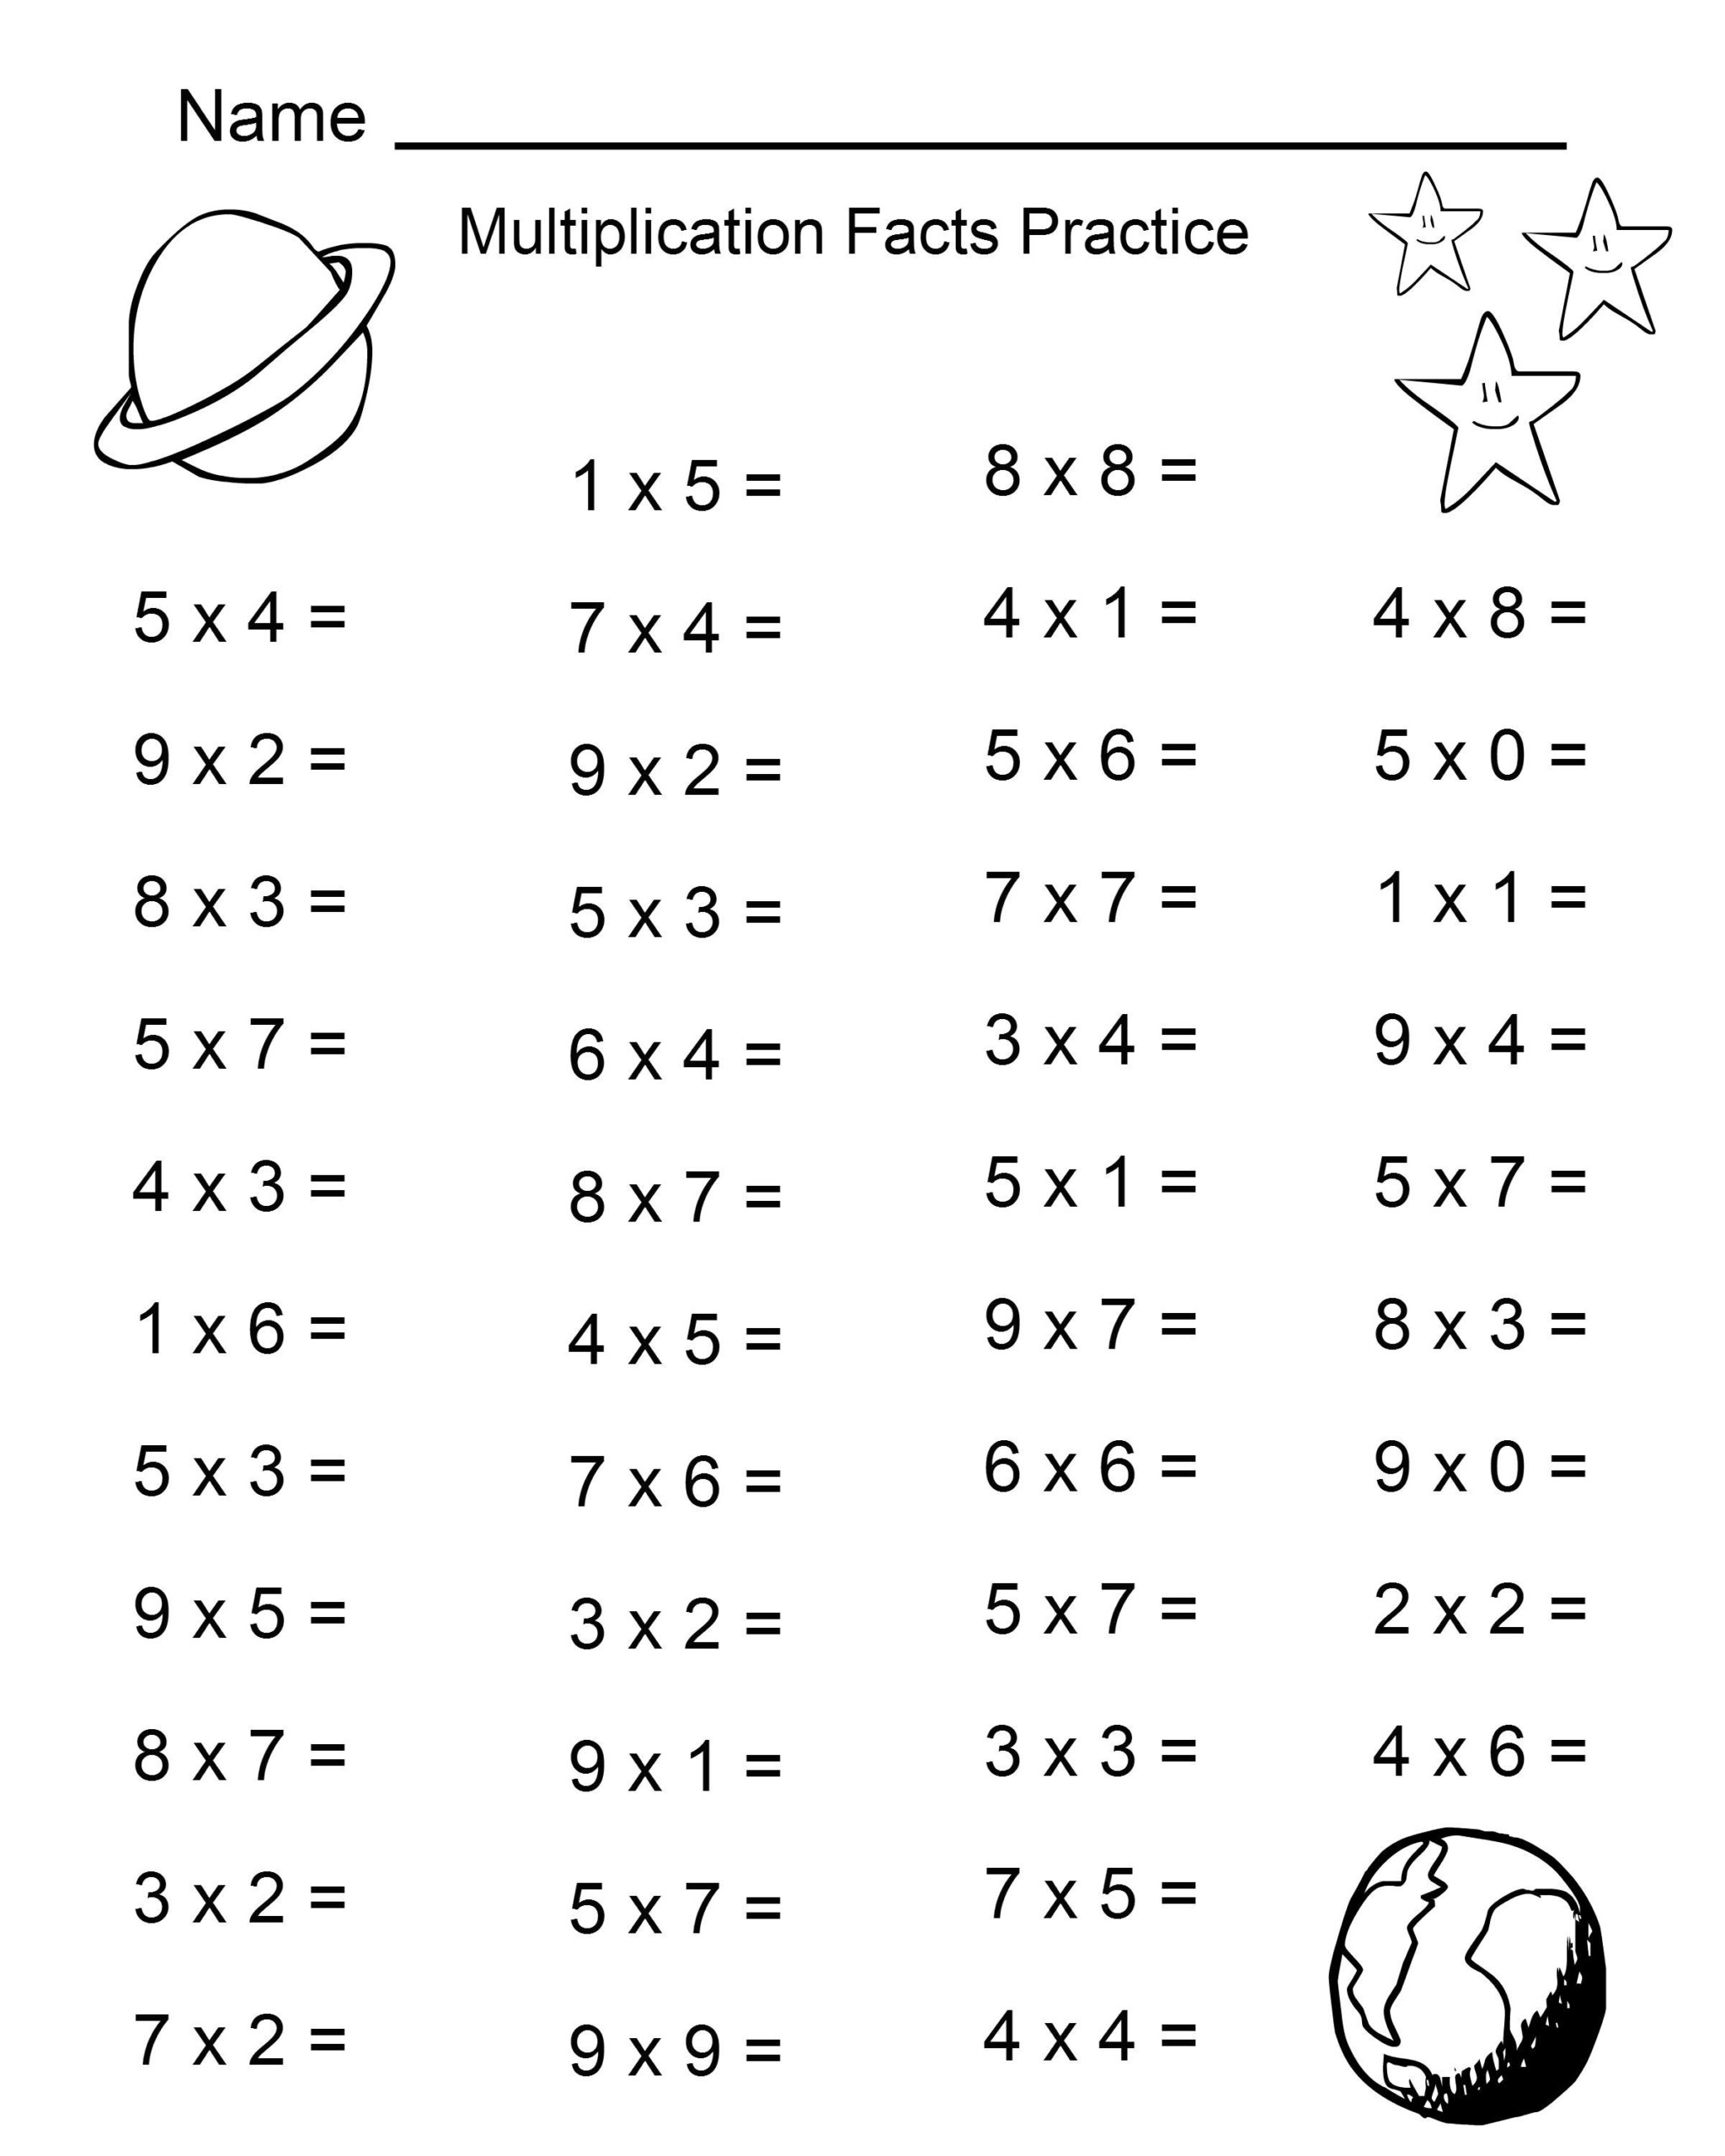 Single Multiplication Worksheets For Students | Educative pertaining to Printable Multiplication Practice Worksheets